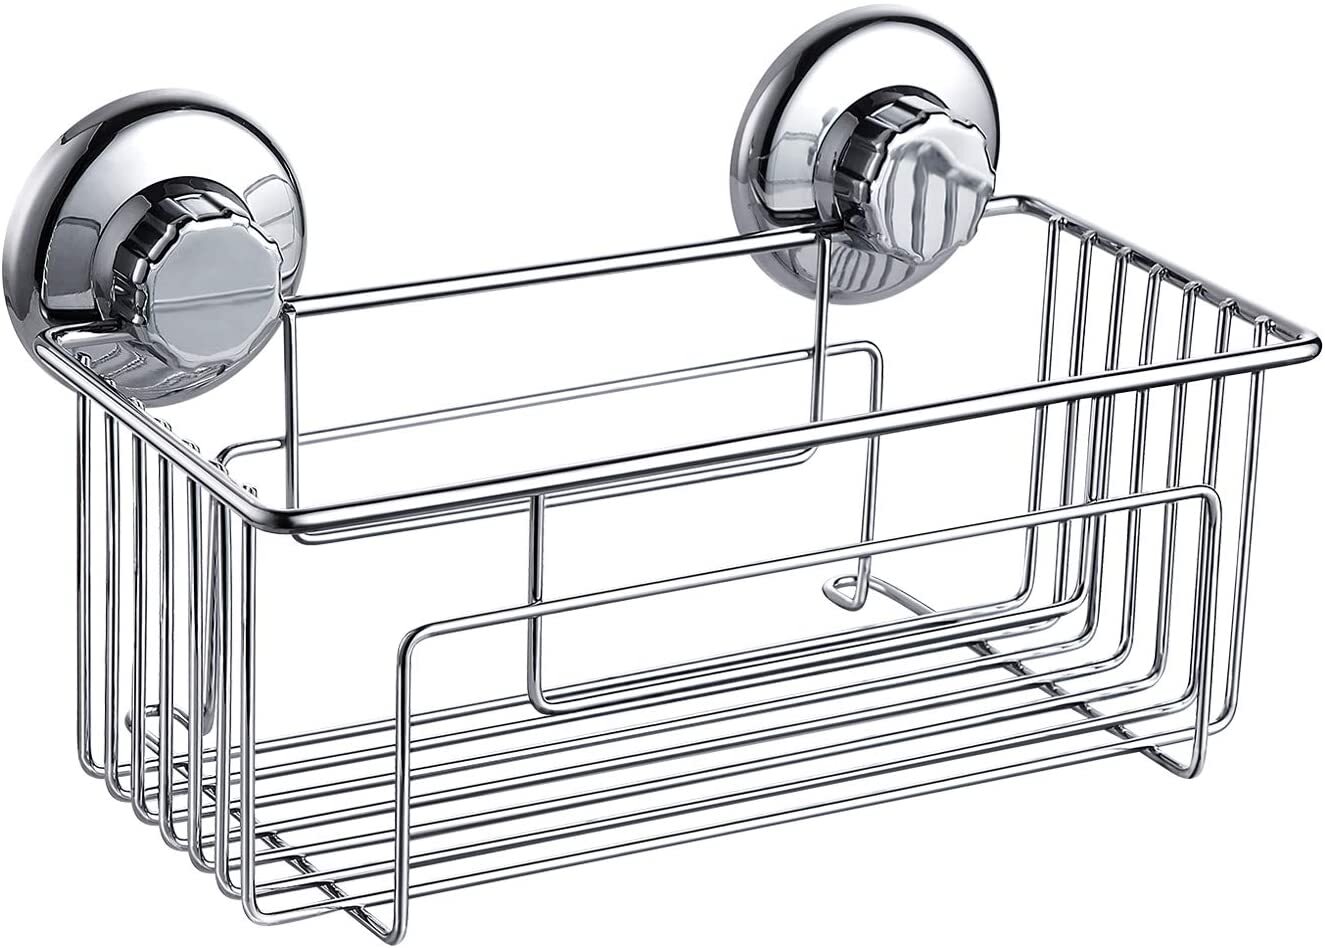 Brushed Steel Comforts Home CS004 Solid Stainless Steel Bathroom Shower Caddy Wall Mount